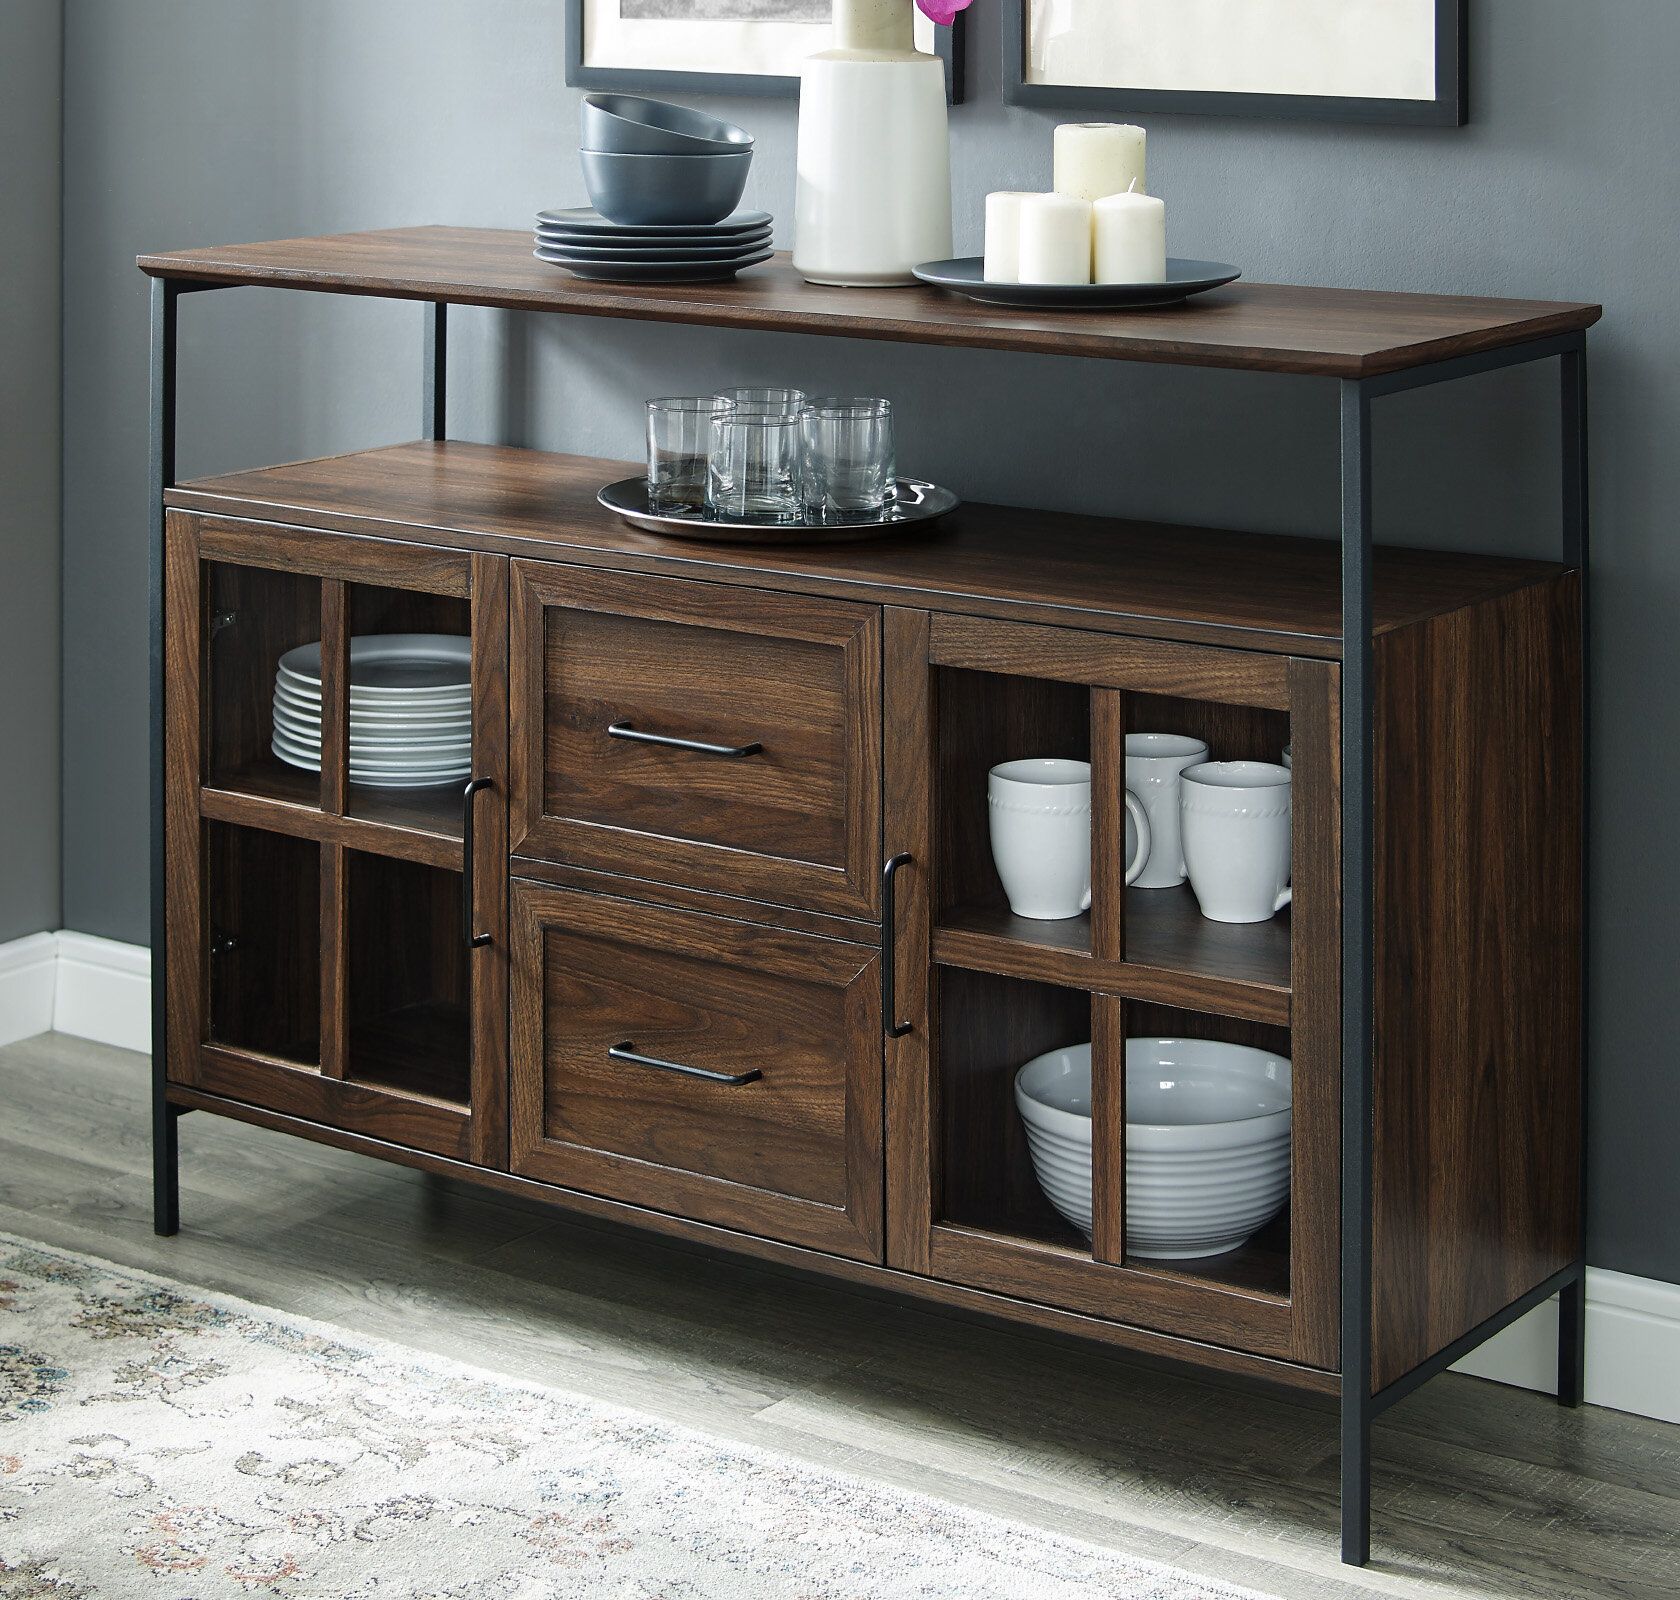 Dining Room Buffet And Hutch | Wayfair In Madison Park Rachel Grey Media Credenzas (View 28 of 30)